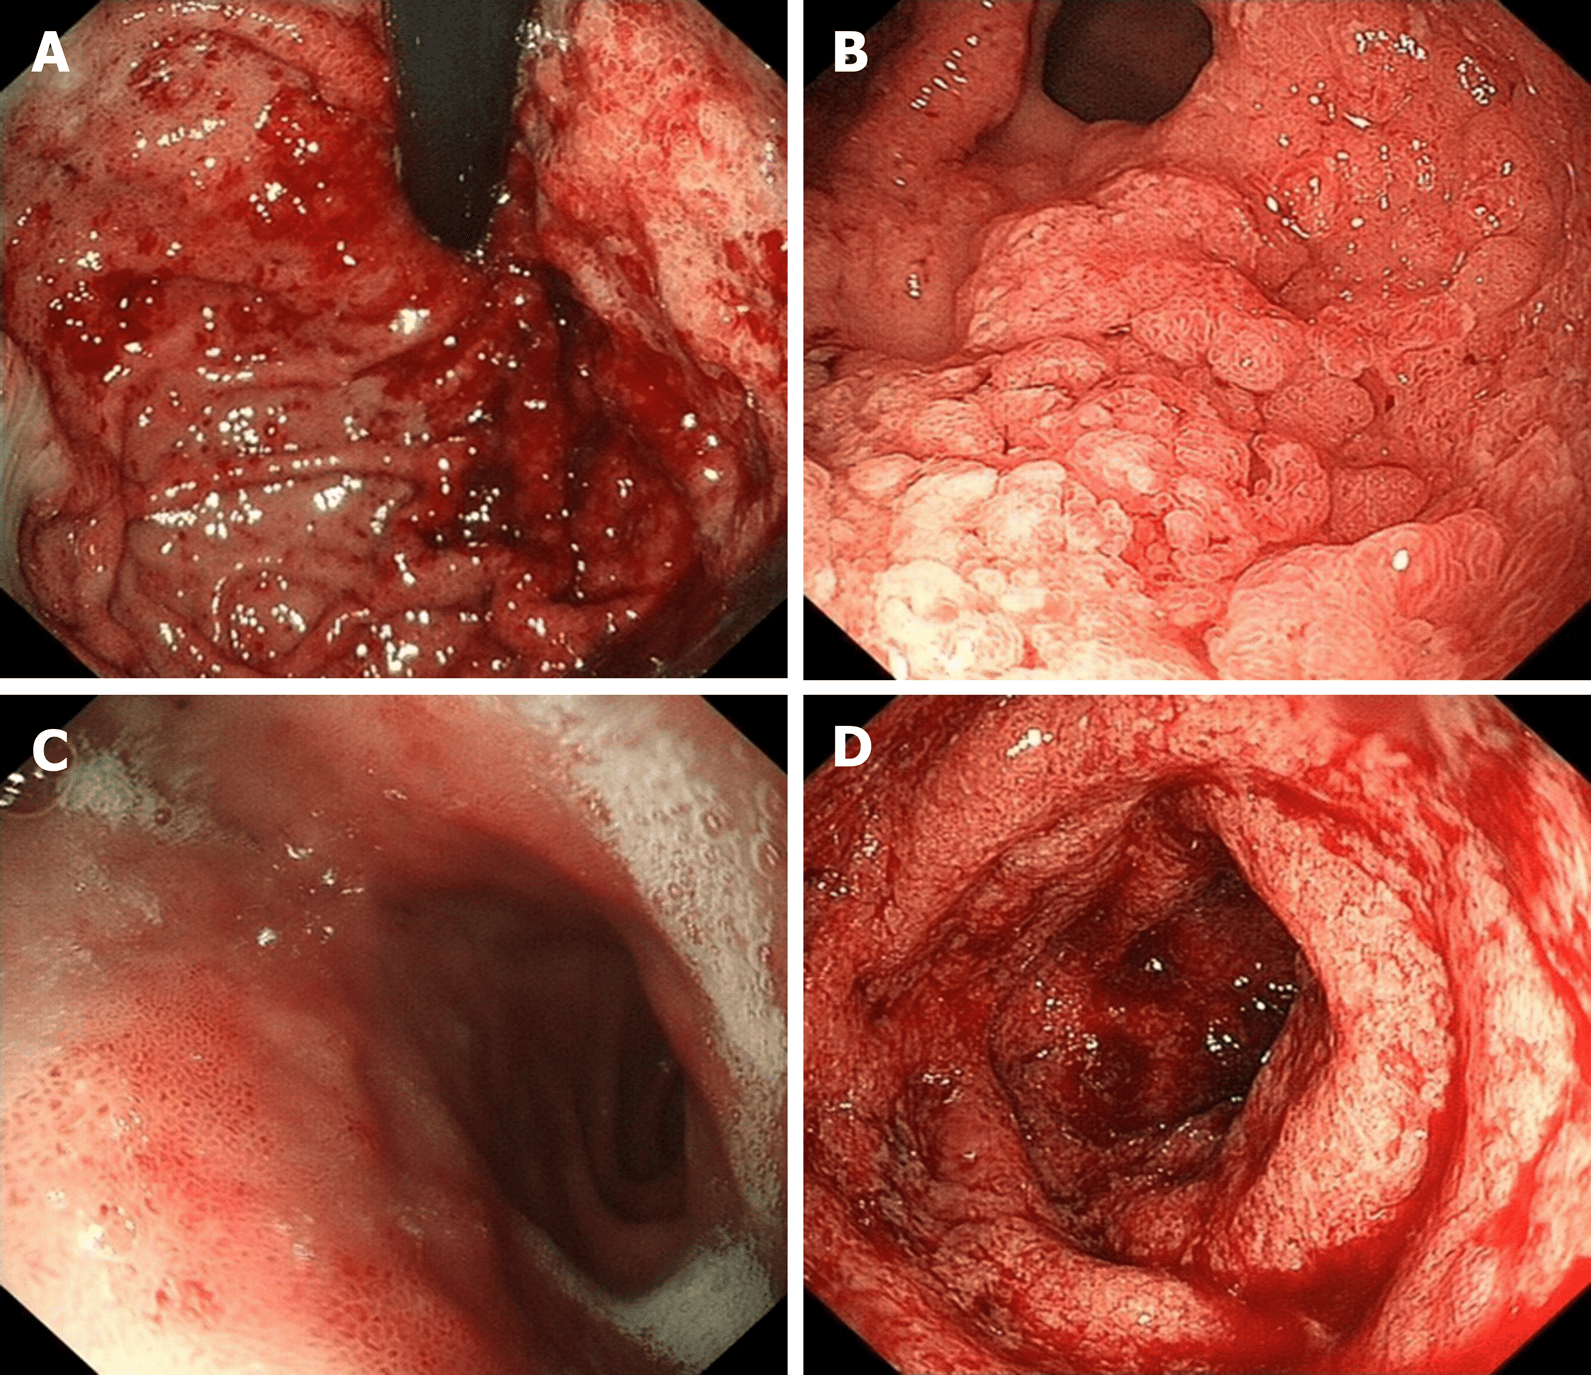 Gastroduodenitis associated with ulcerative colitis: A case report